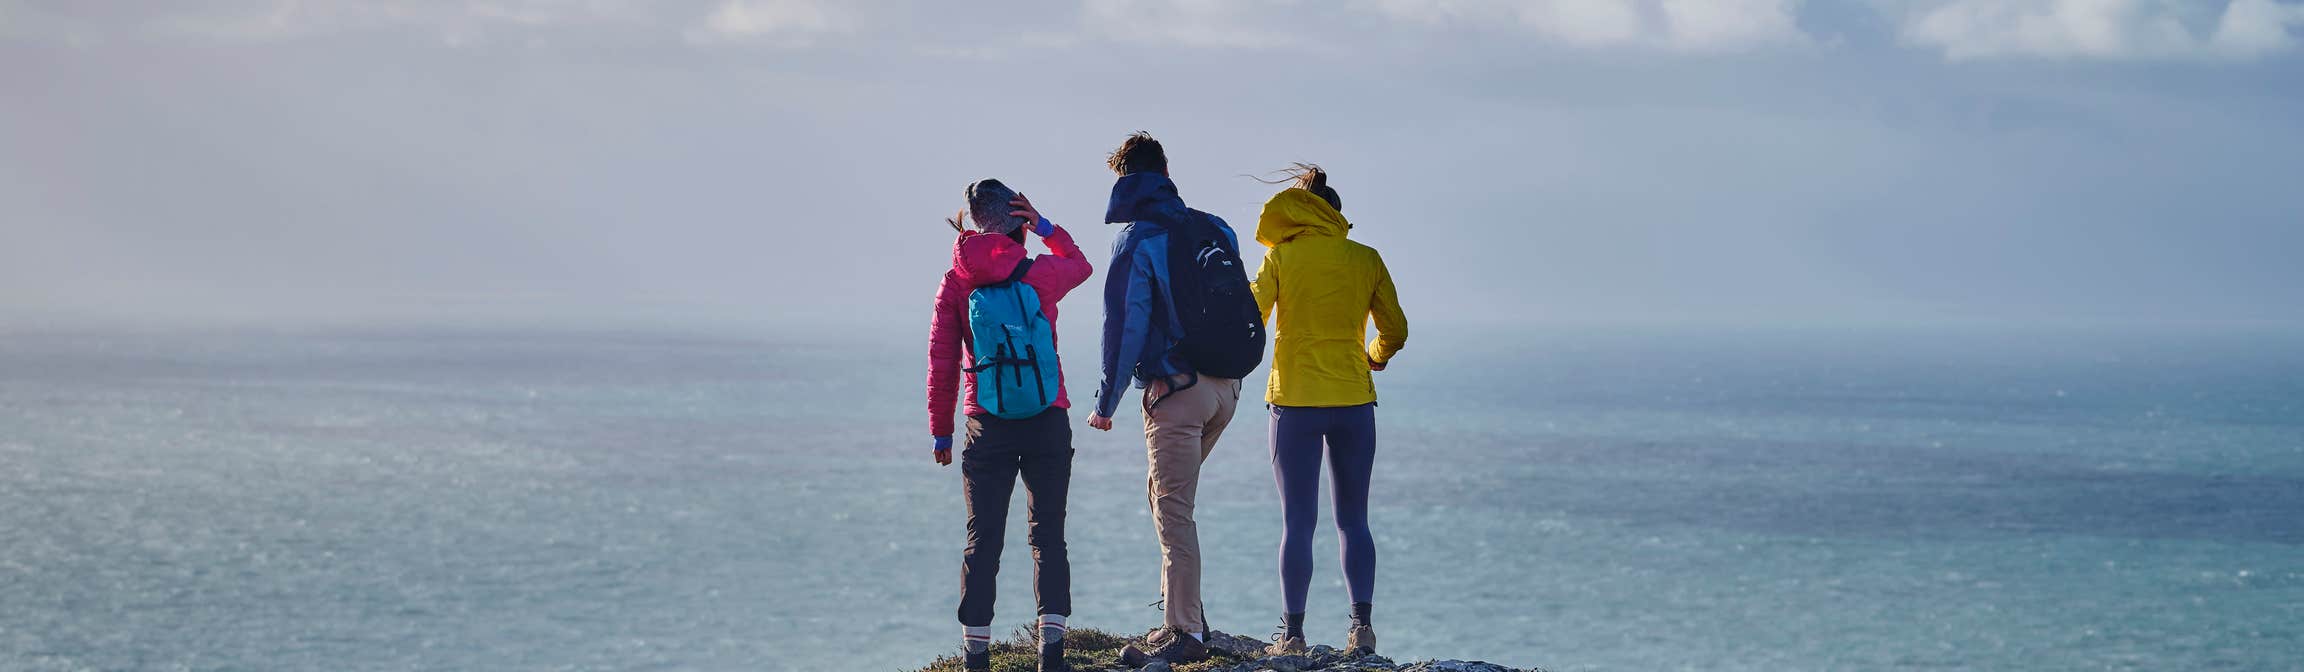 Three hikers on the Sheep's Head Trail in Co Cork